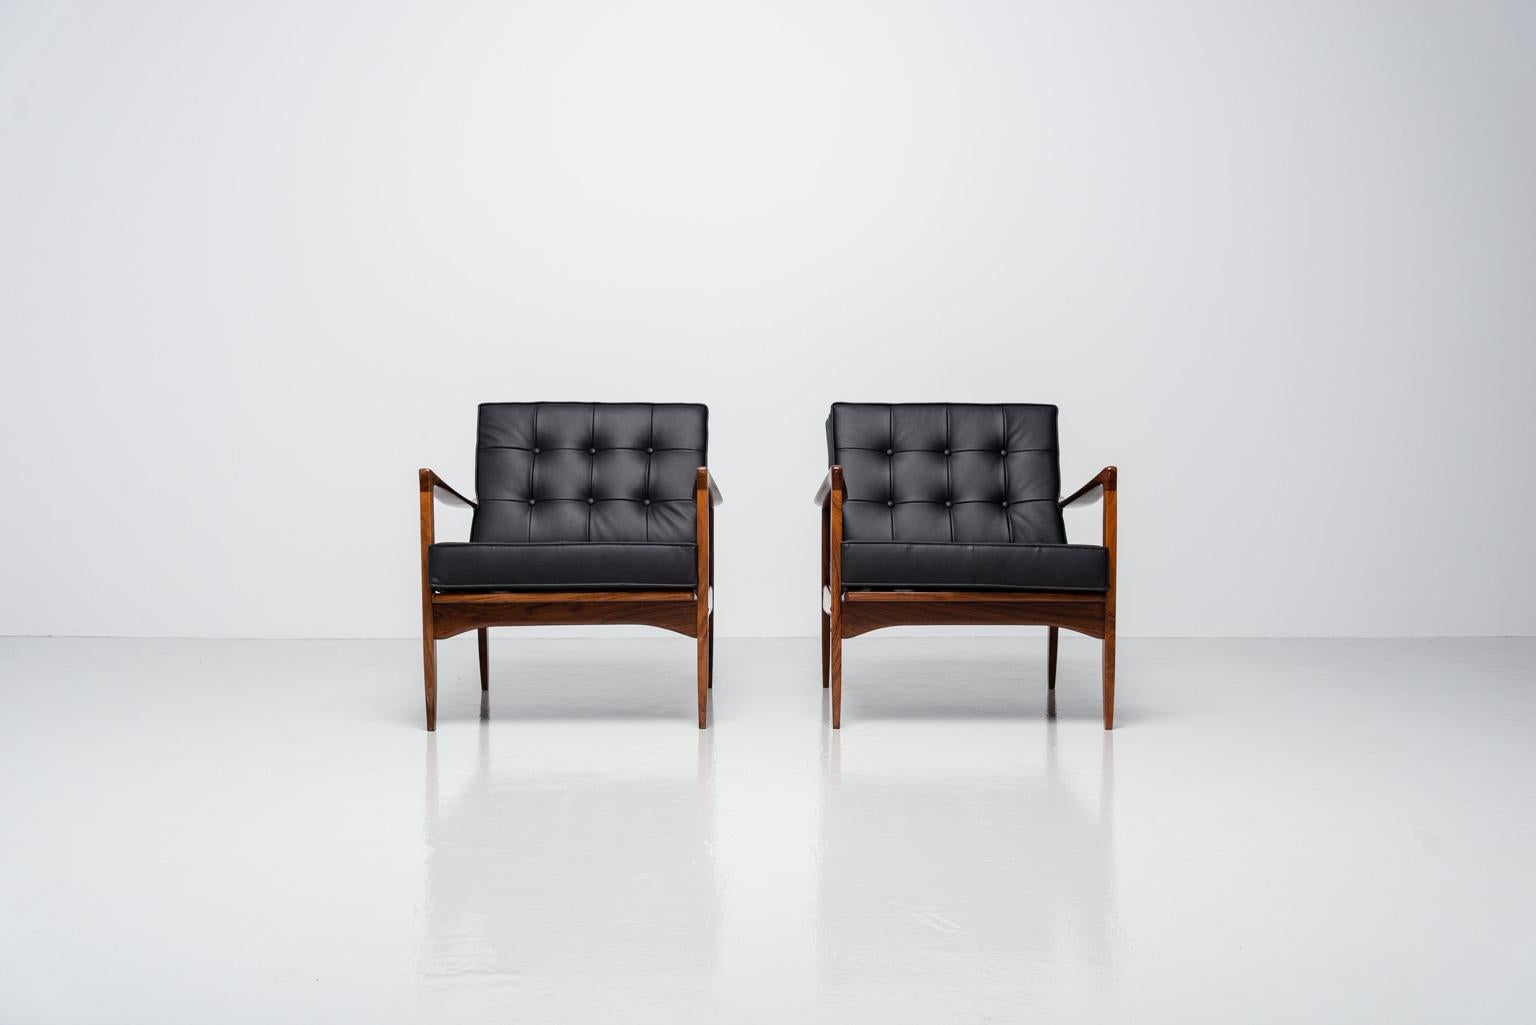 Stunning pair of so called 'Kandidaten' (candidate) lounge chairs designed by Ib Kofod Larsen and manufactured by OPE, Sweden 1958. The chairs have a sculptural solid rosewood frame and are newly upholstered like the original cushions in a premium